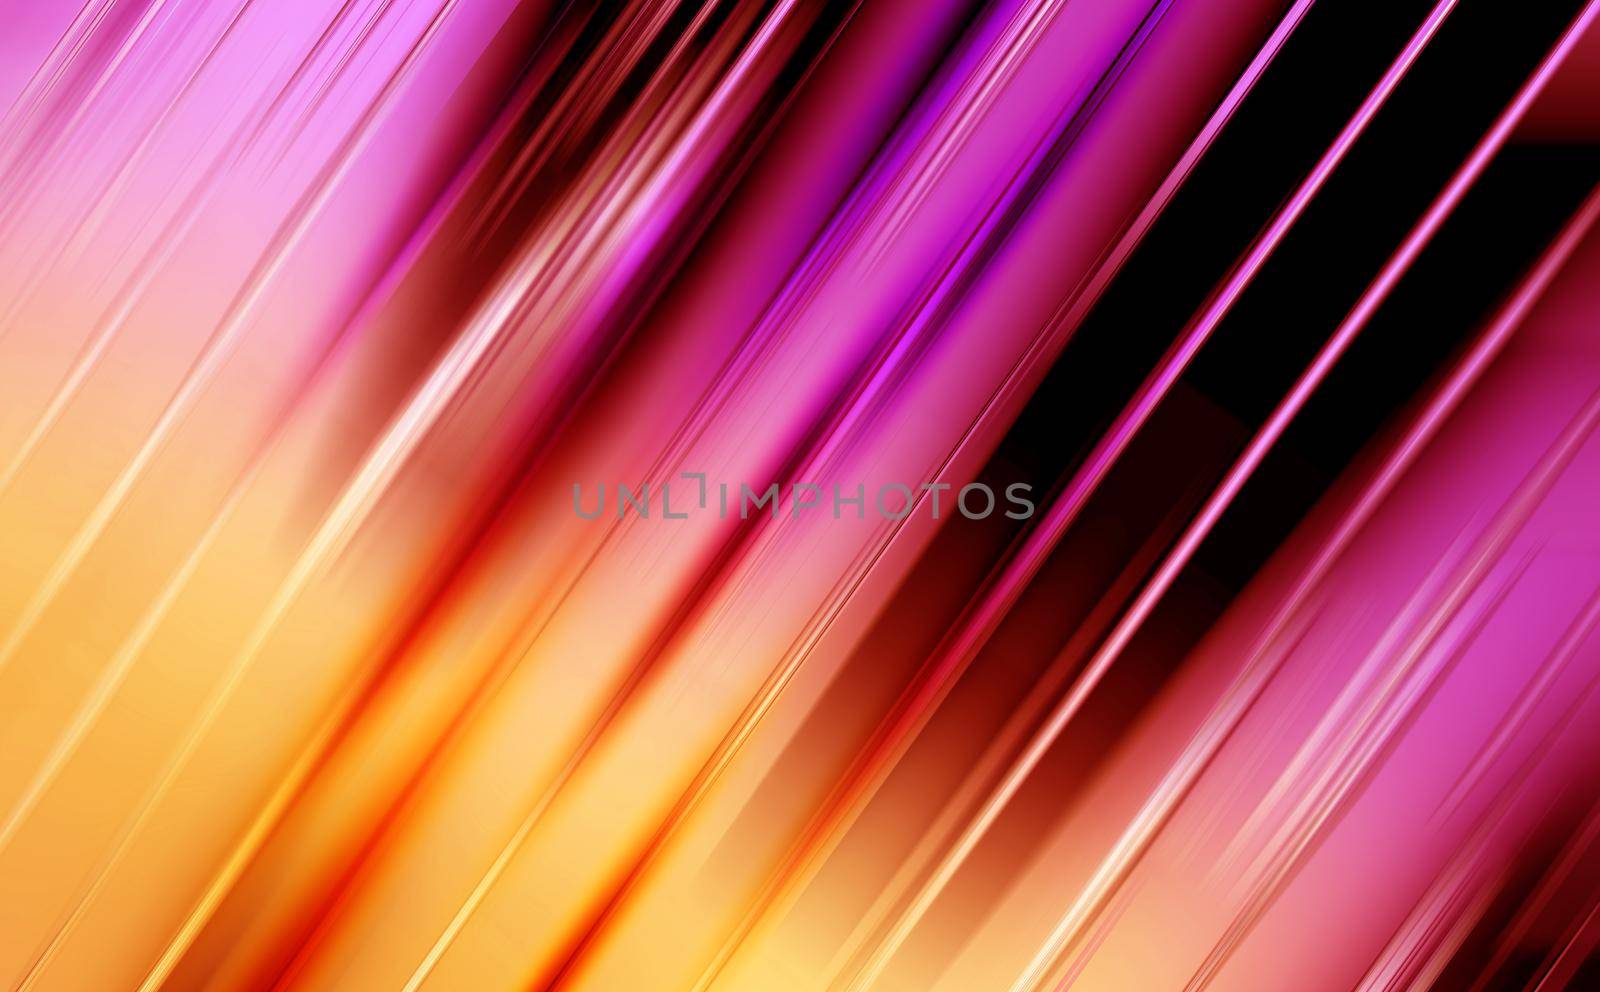 Abstract Blurred Yellowish Pink Bar Panels Background.